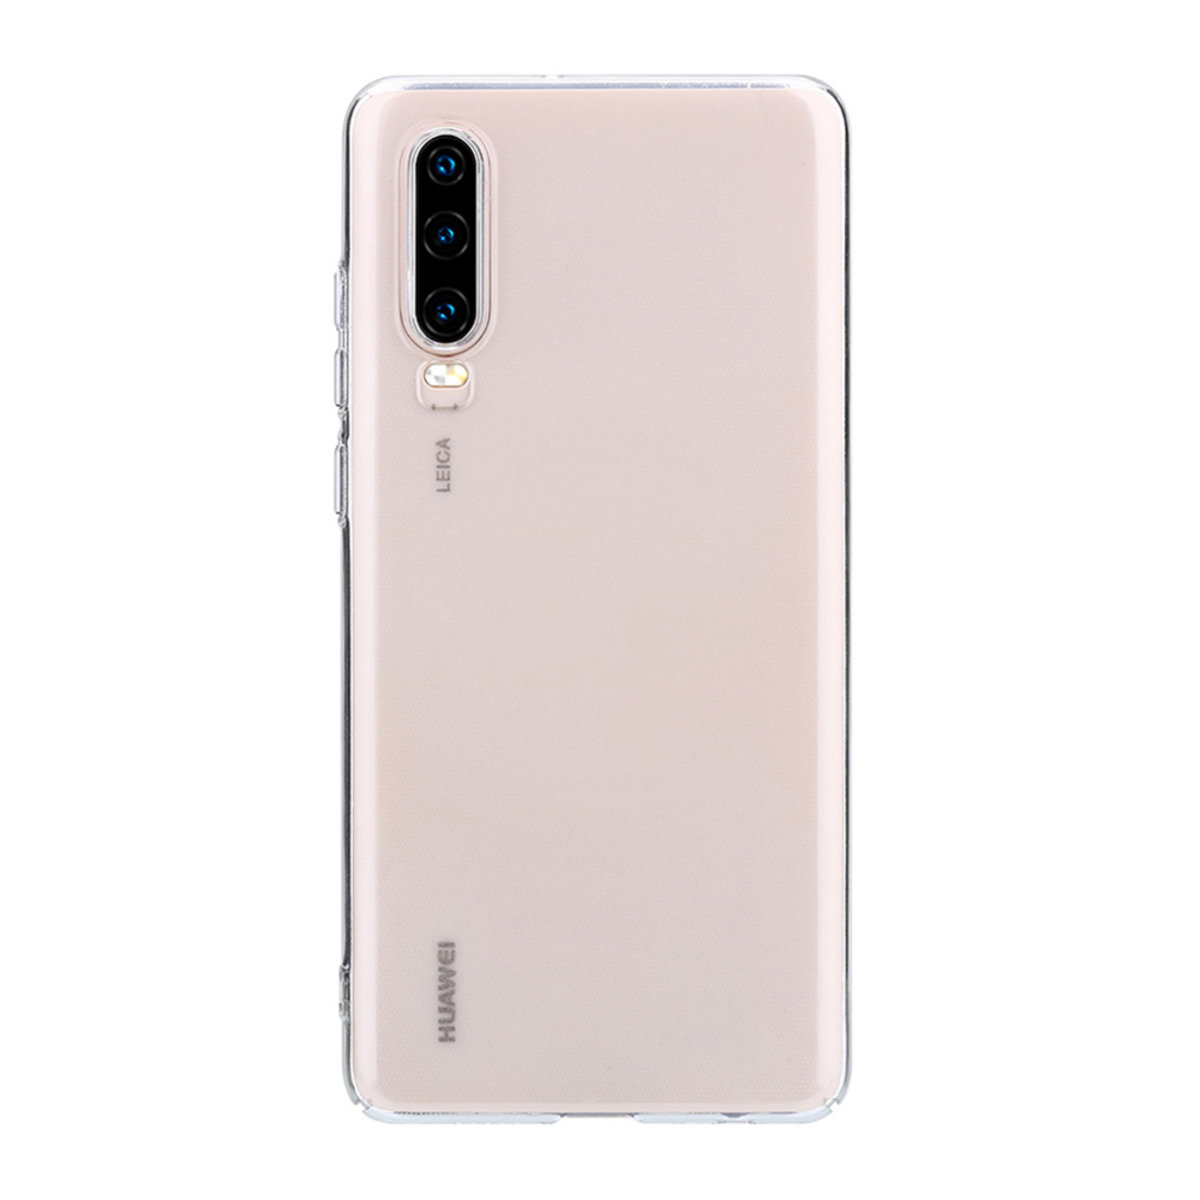 Support Huawei P30 保護殻 ( 透明 ) Air Jacket Simple